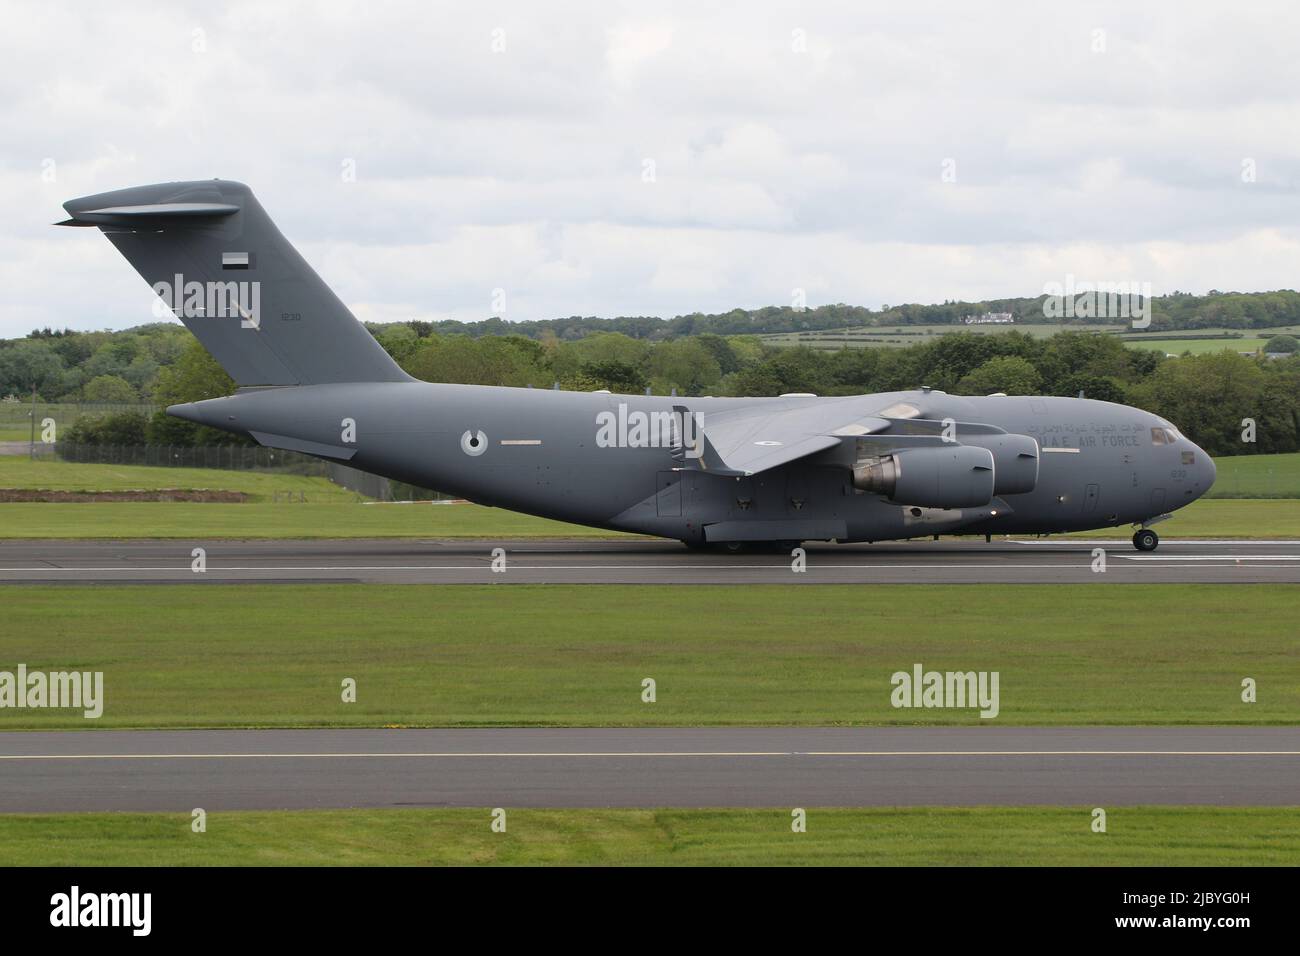 1230 (140008), a Boeing C-17 Globemaster III operated by the United Arab Emirates Air Force, departing from Prestwick International Airport in Ayrshire, Scotland. Stock Photo